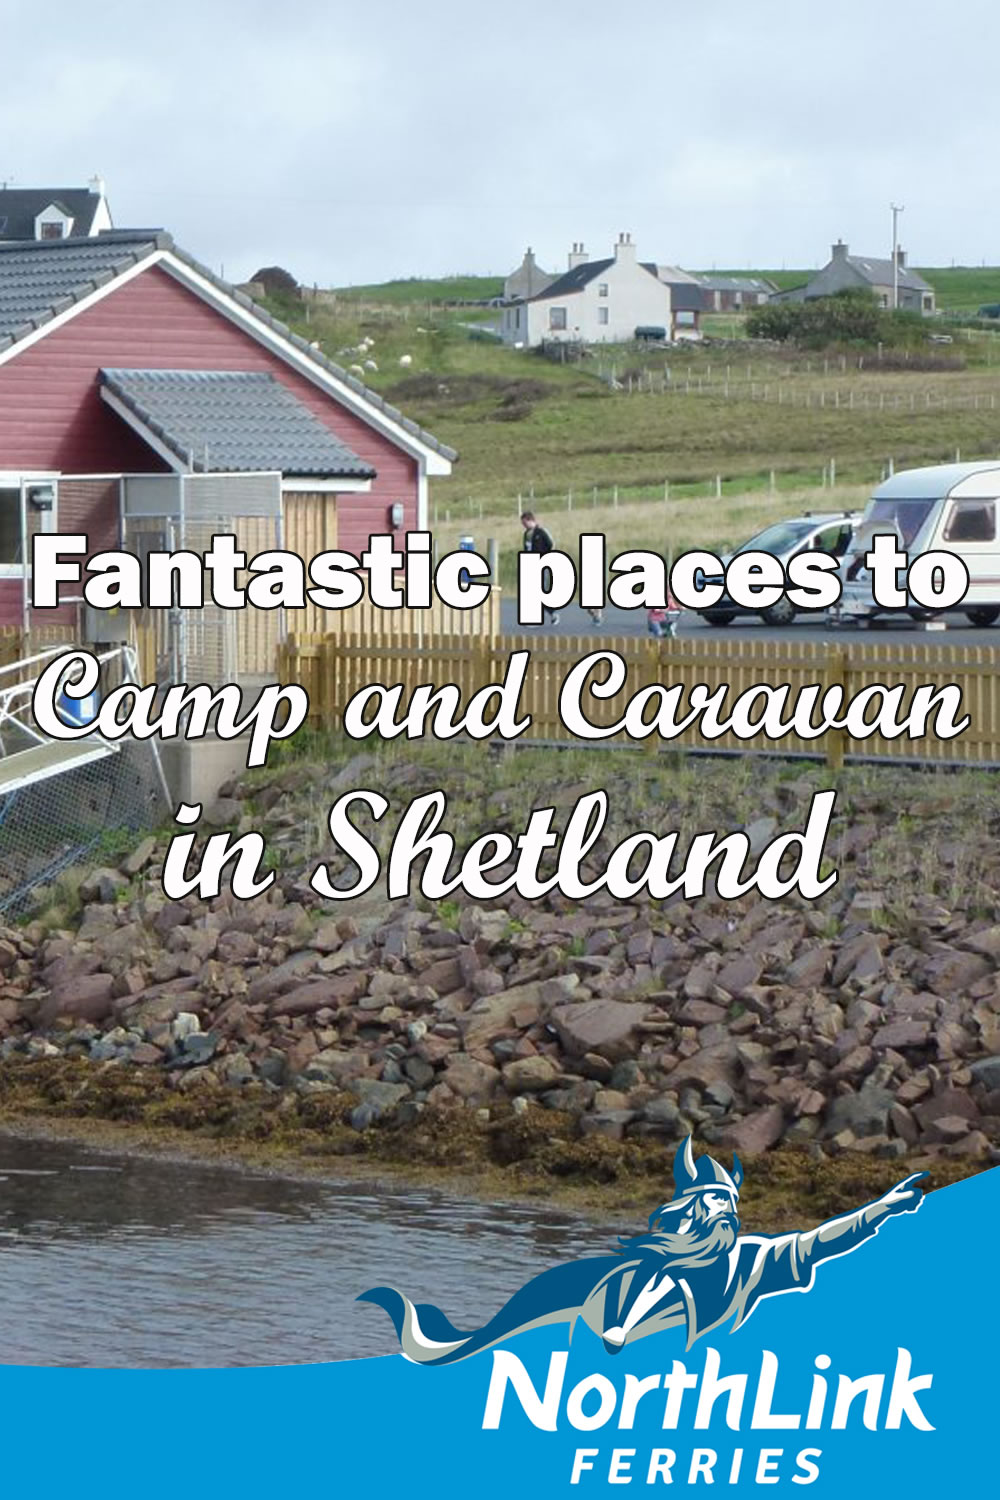 Fantastic places to Camp and Caravan in Shetland